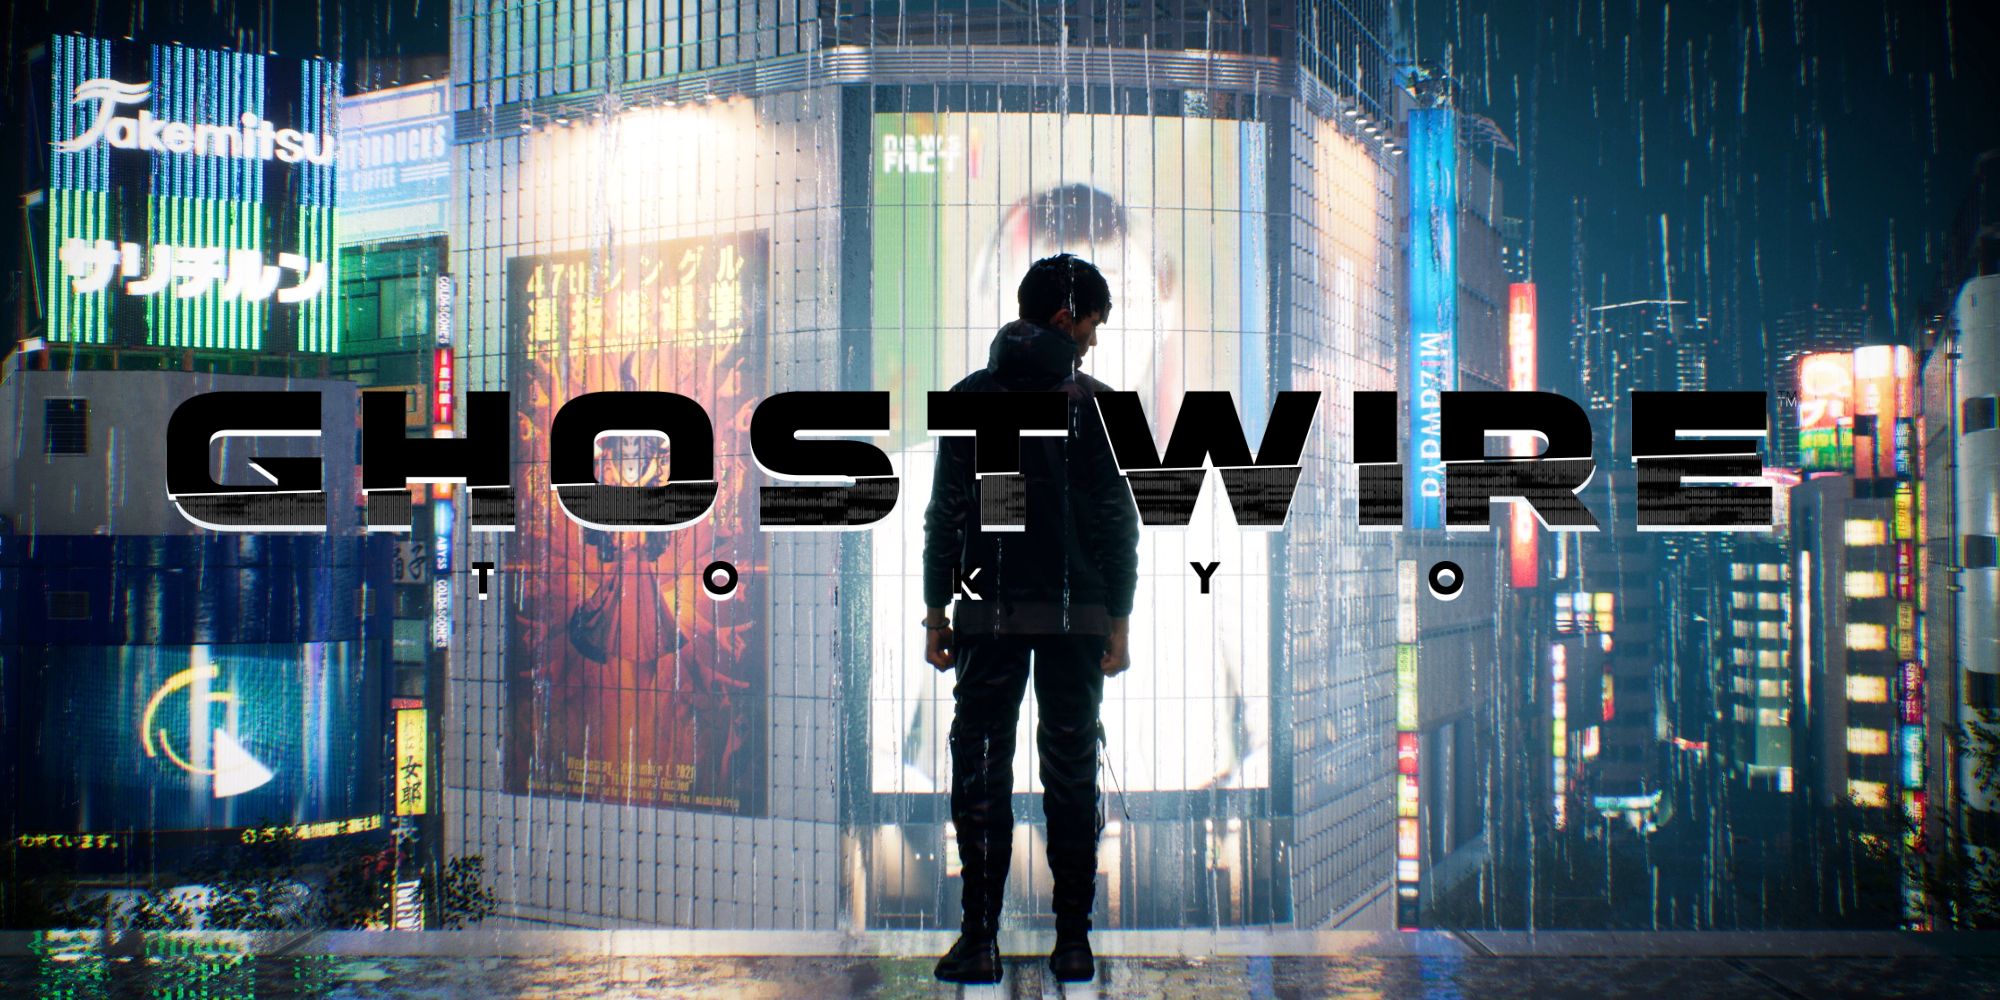 Akito standing in front of billboards with game title in front